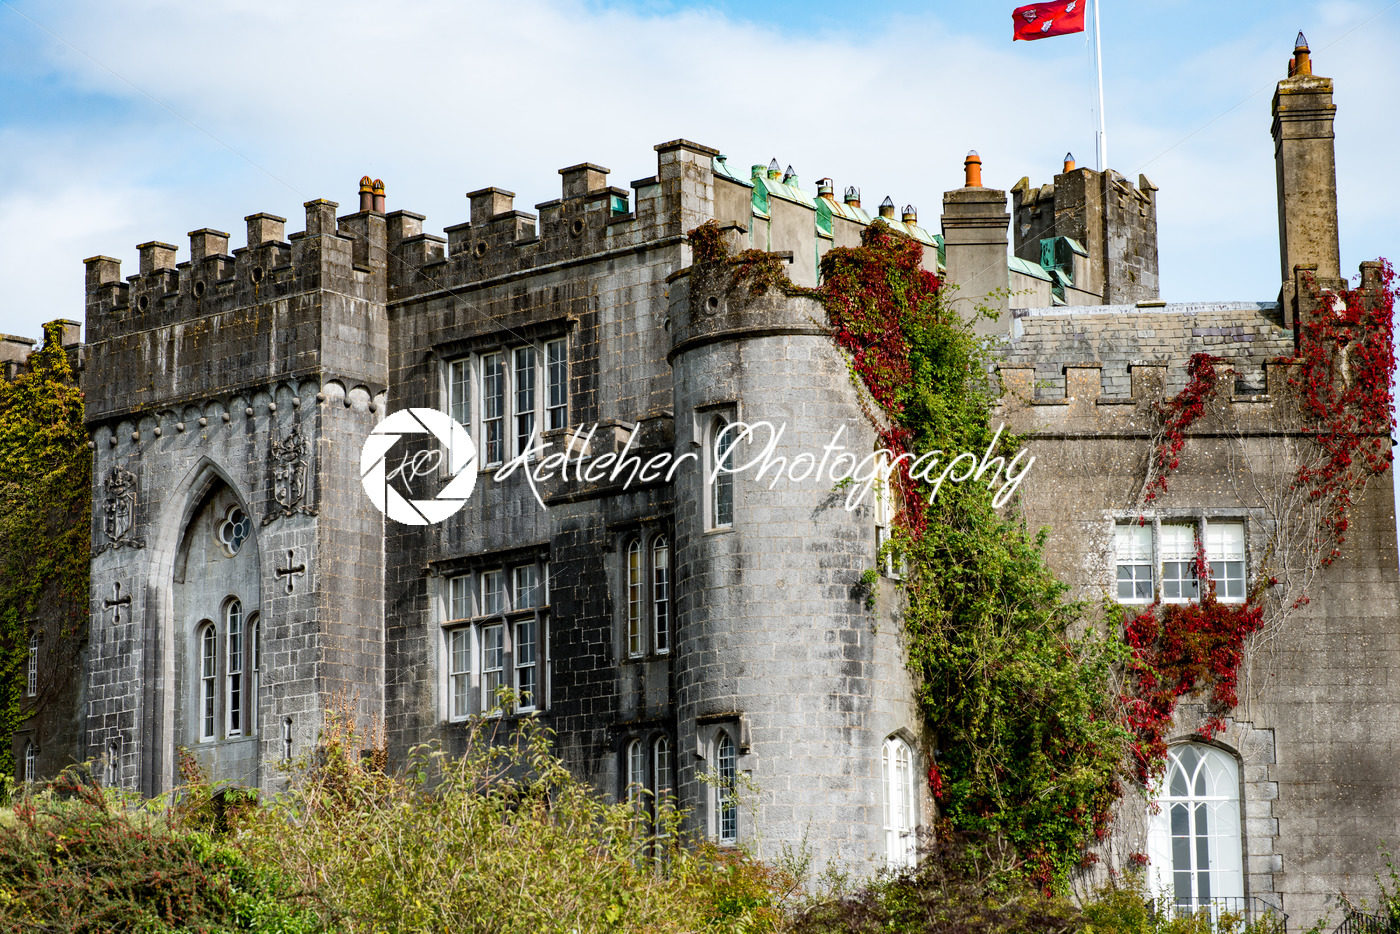 COUNTY OFFALY, IRELAND – AUGUST 23, 2017: Birr Castle in County Offaly, Ireland - Kelleher Photography Store